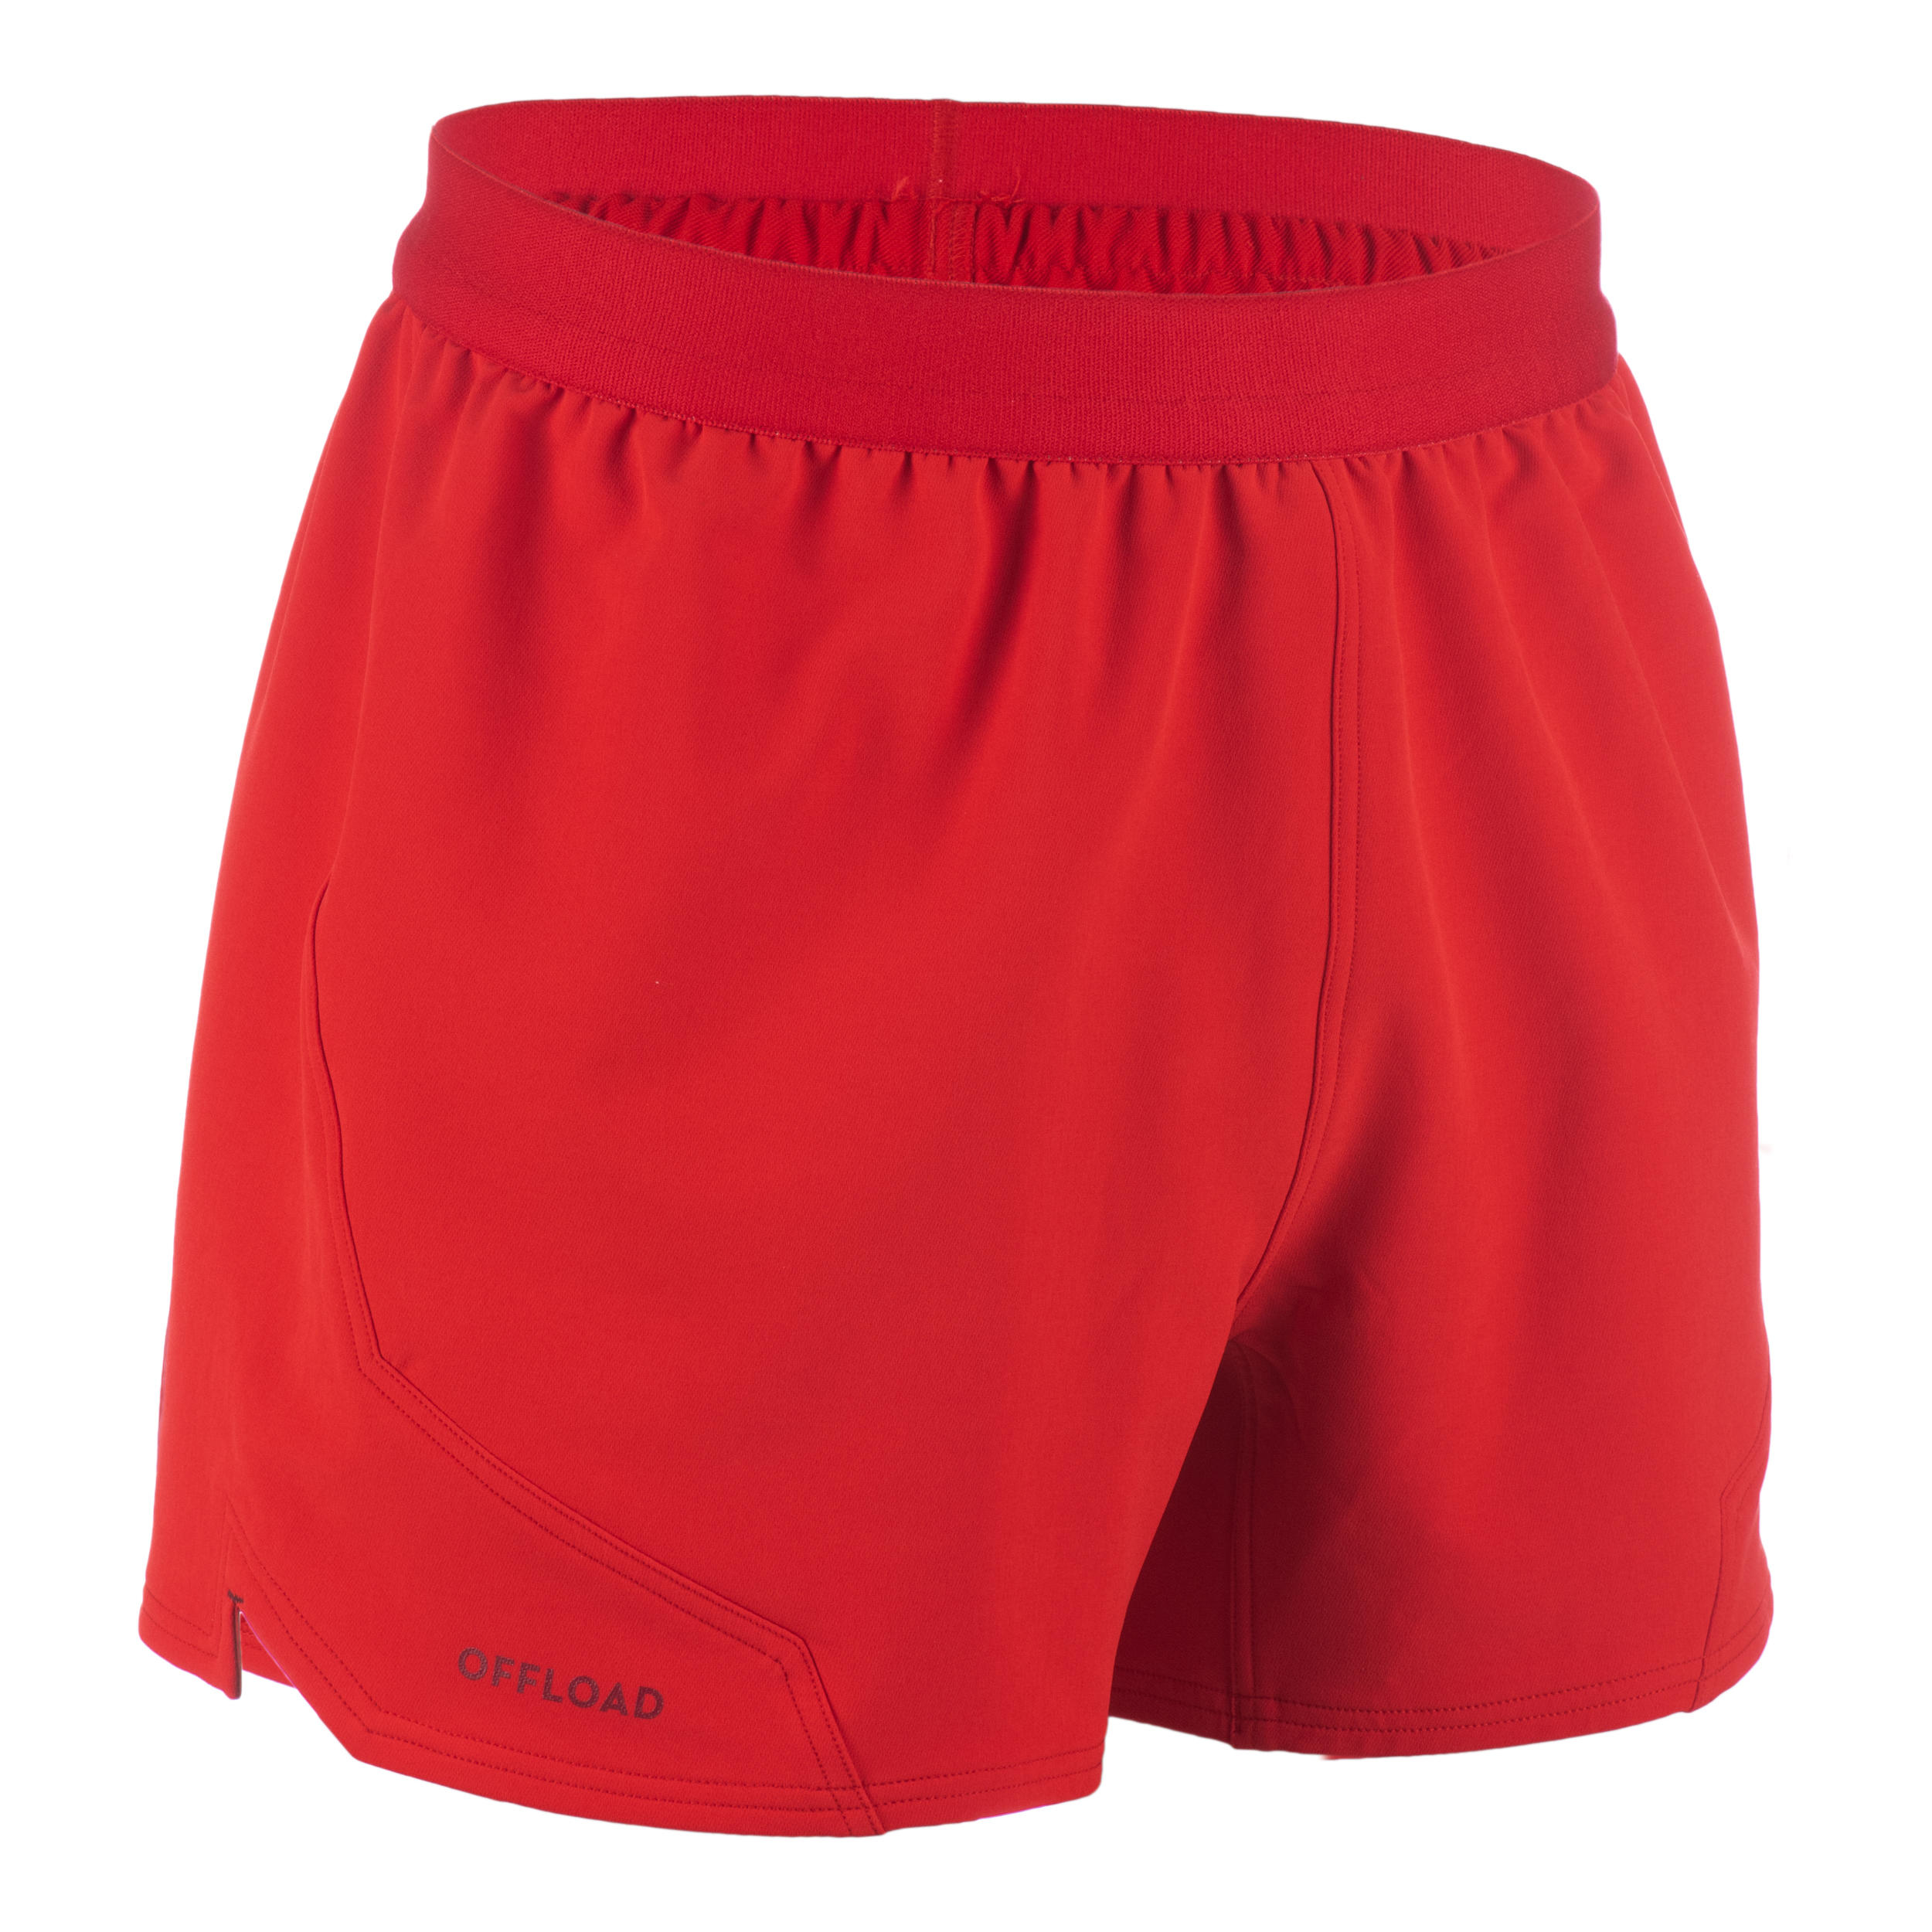 OFFLOAD Men’s Rugby Shorts R500 - Red